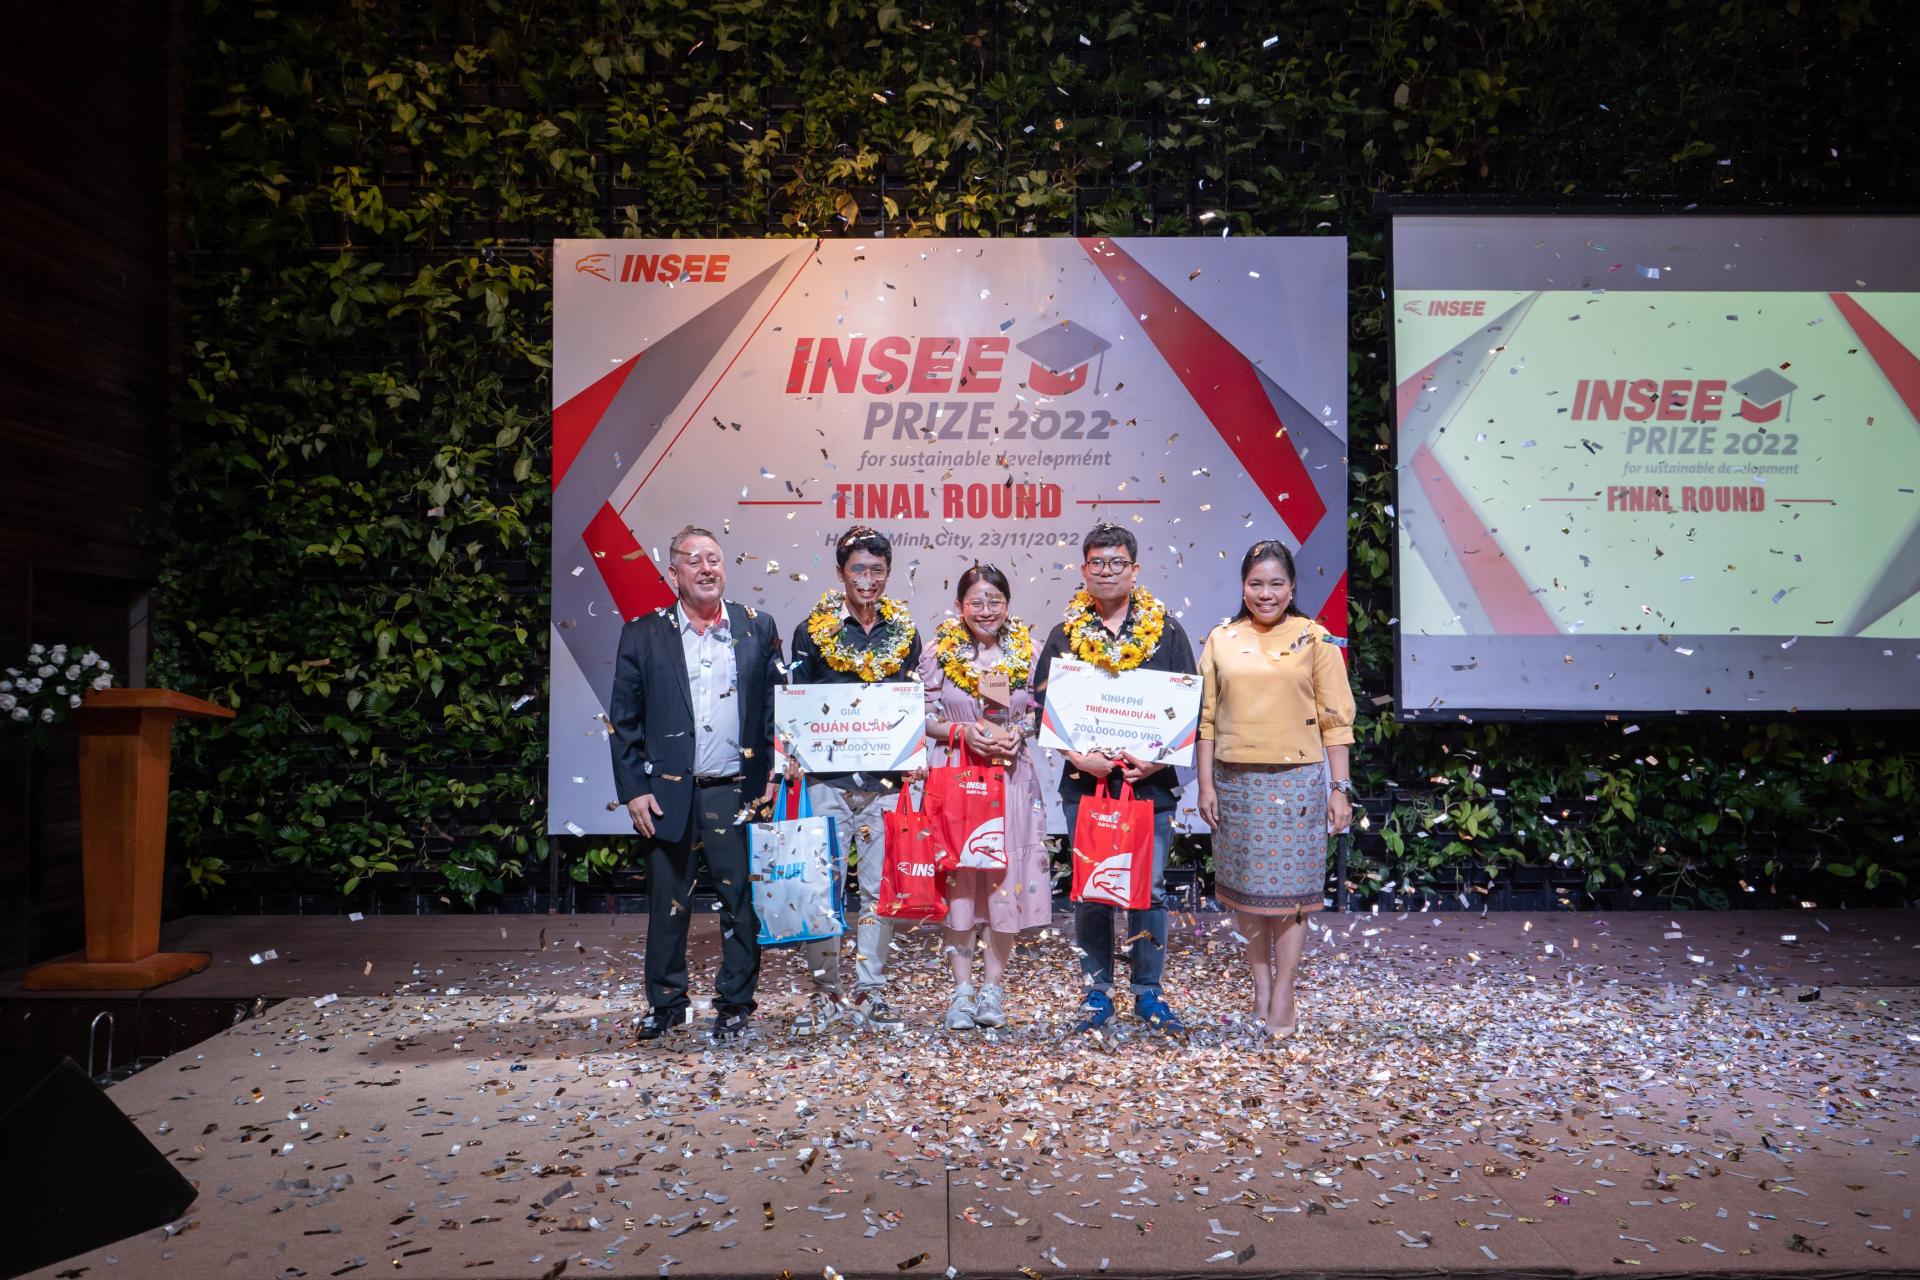 INSEE PRIZE 2022 CHAMPION OFFICIALLY REVEALED